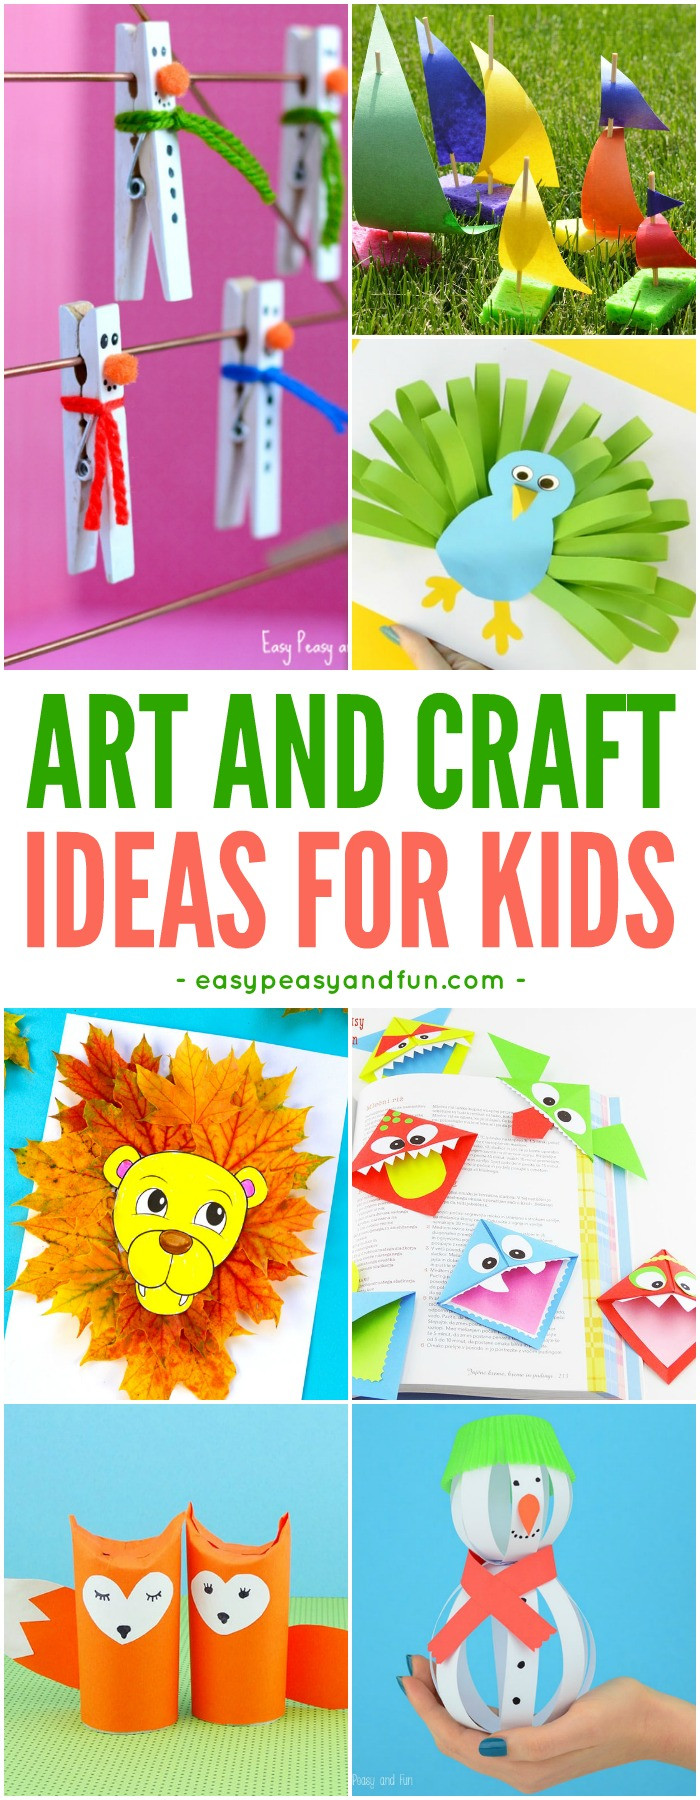 Toddler Art And Craft Projects
 Crafts For Kids Tons of Art and Craft Ideas for Kids to